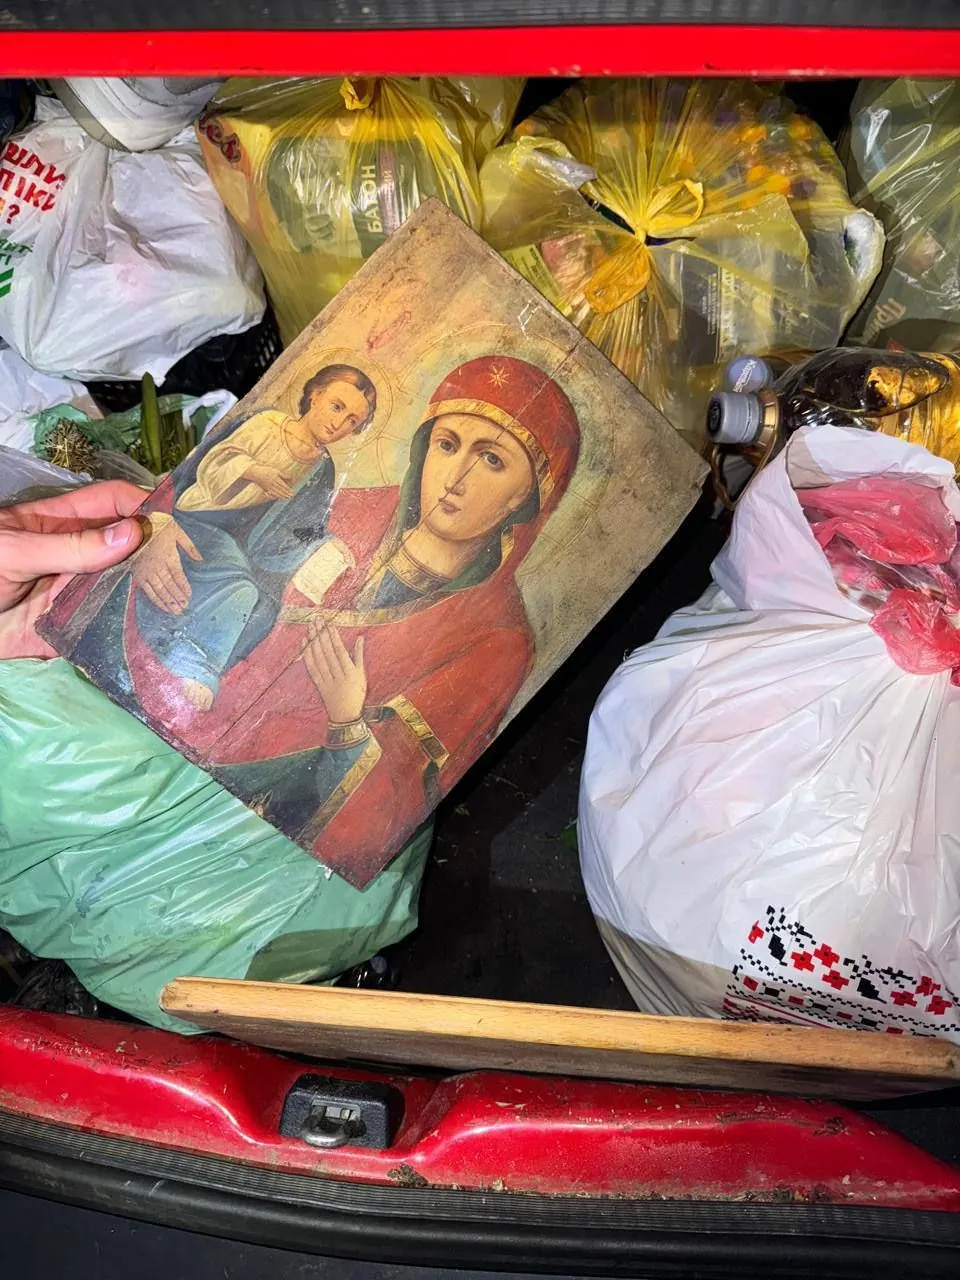 Ancient icons were smuggled out of Ukraine in personal belongings